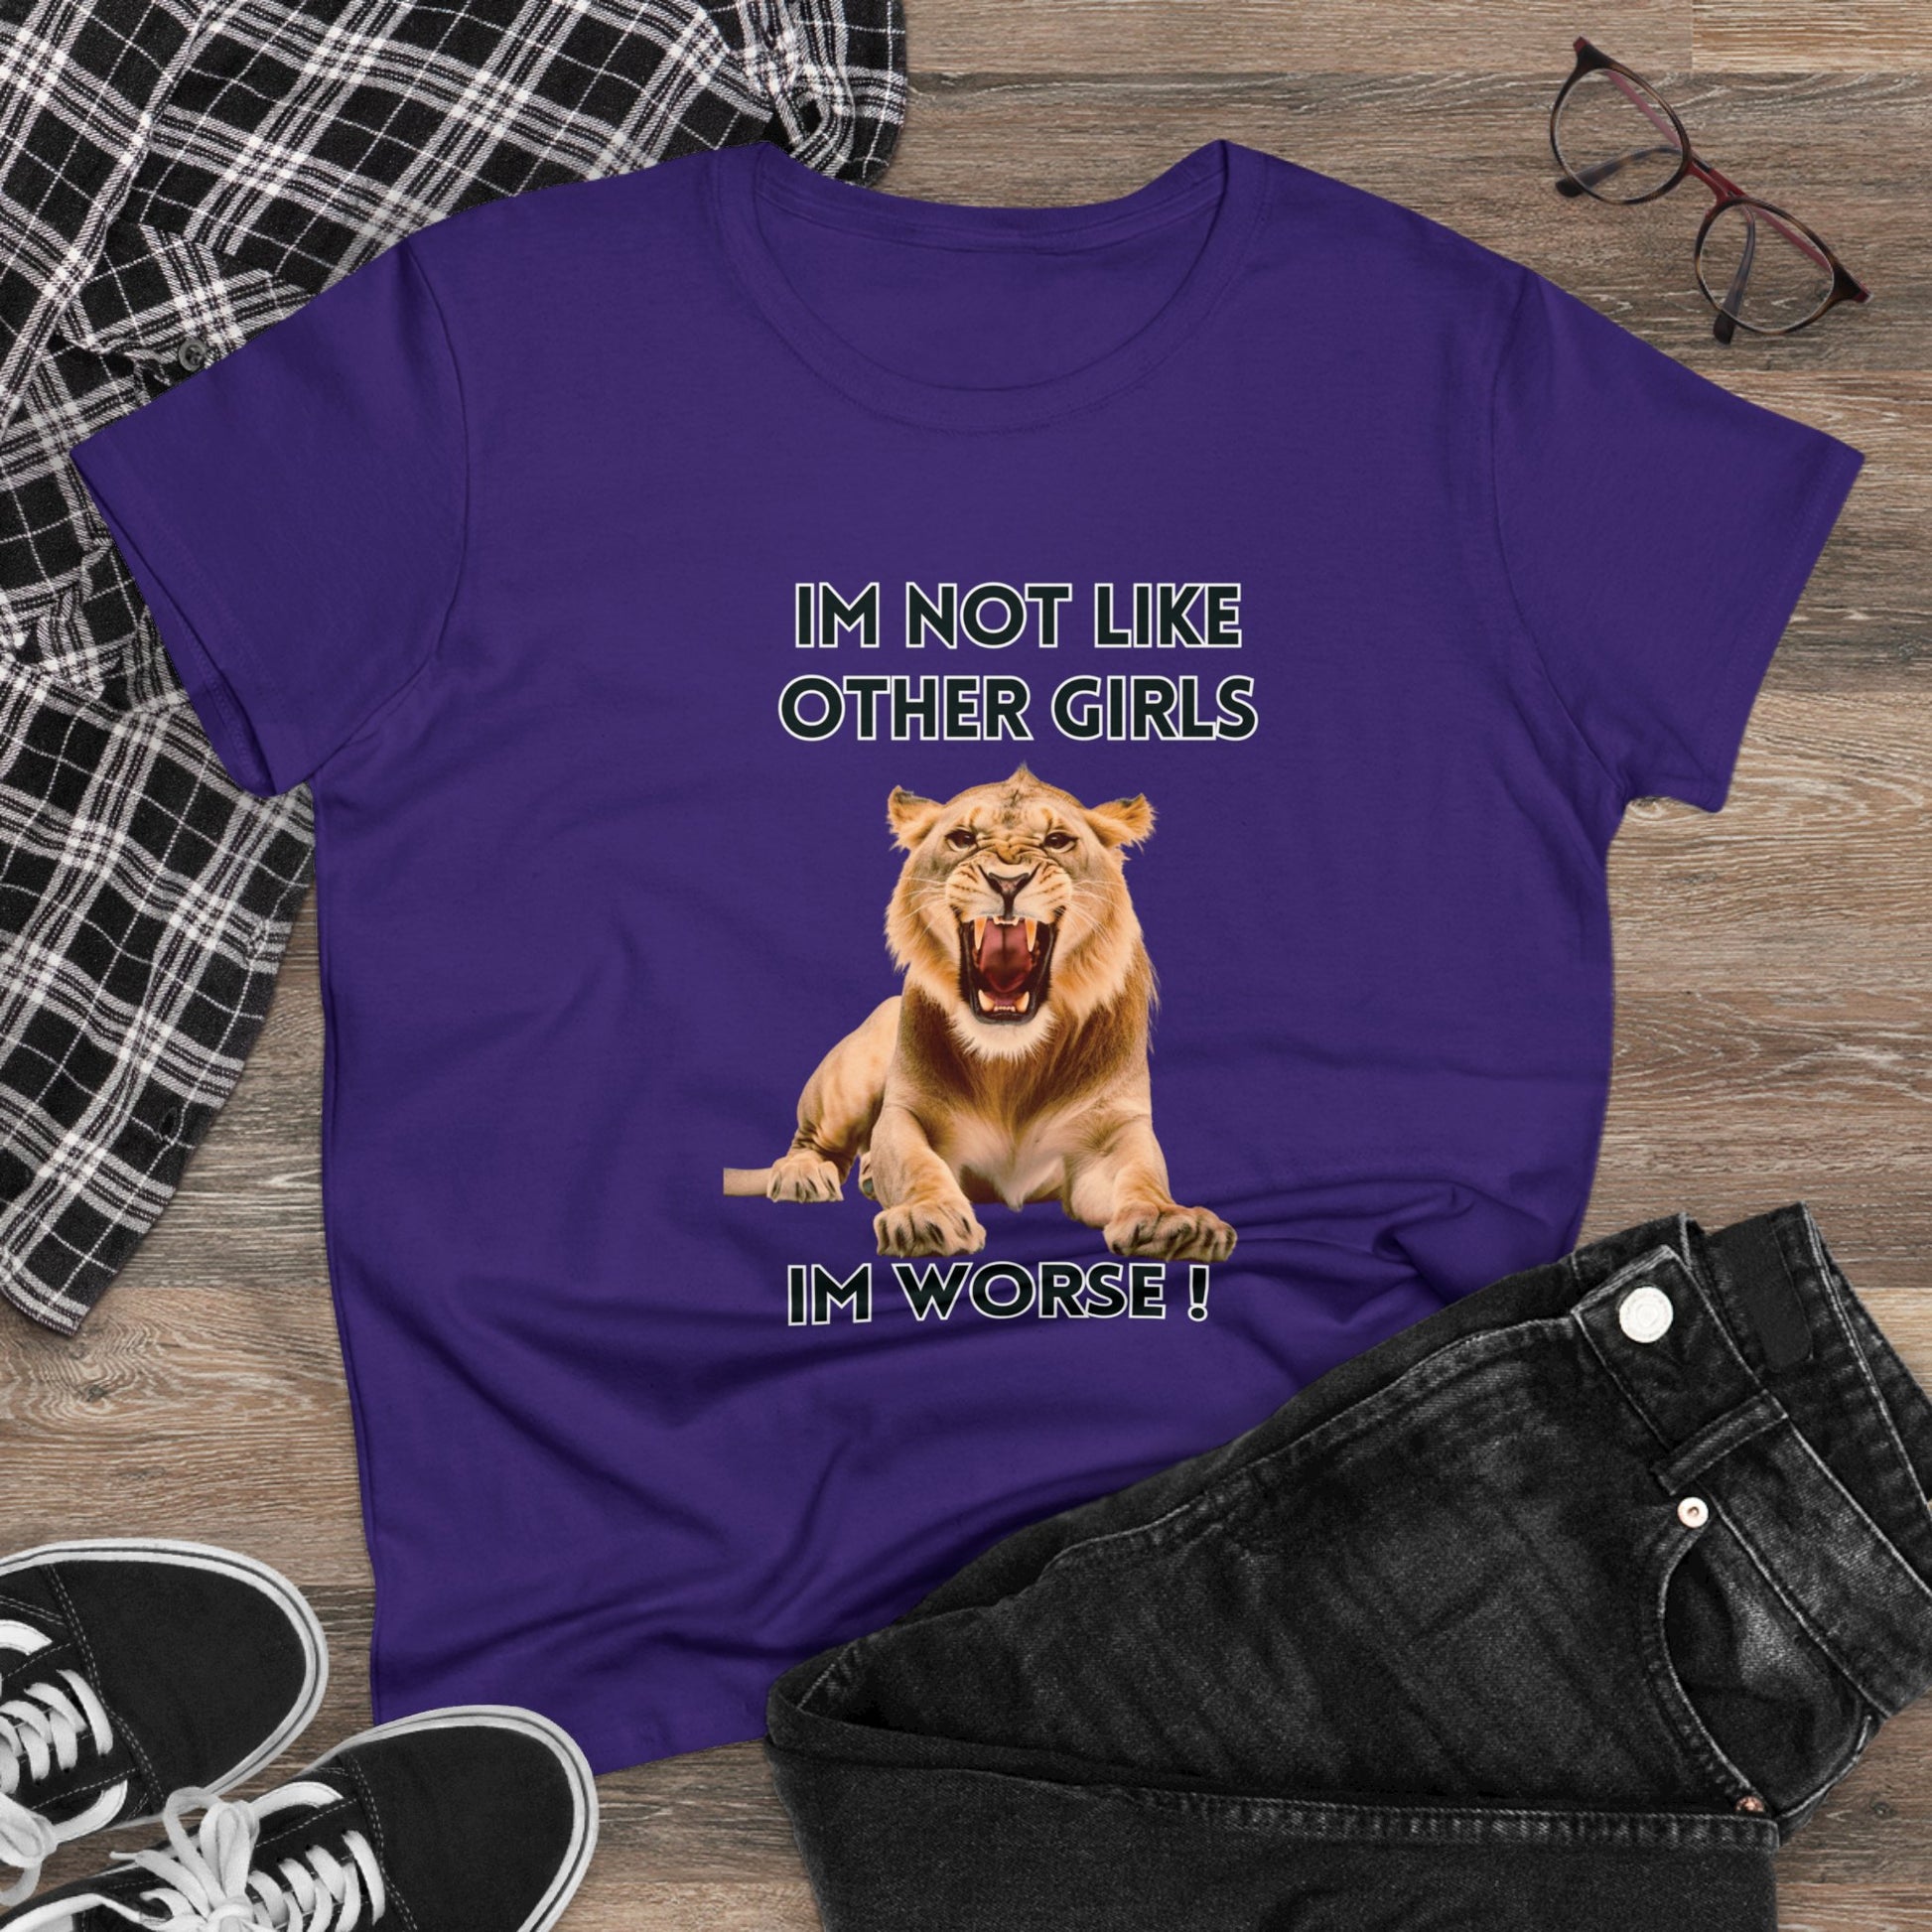 Angry Lion Funny T-Shirt - I'm Not Like Other Girls T-Shirt Purple S 